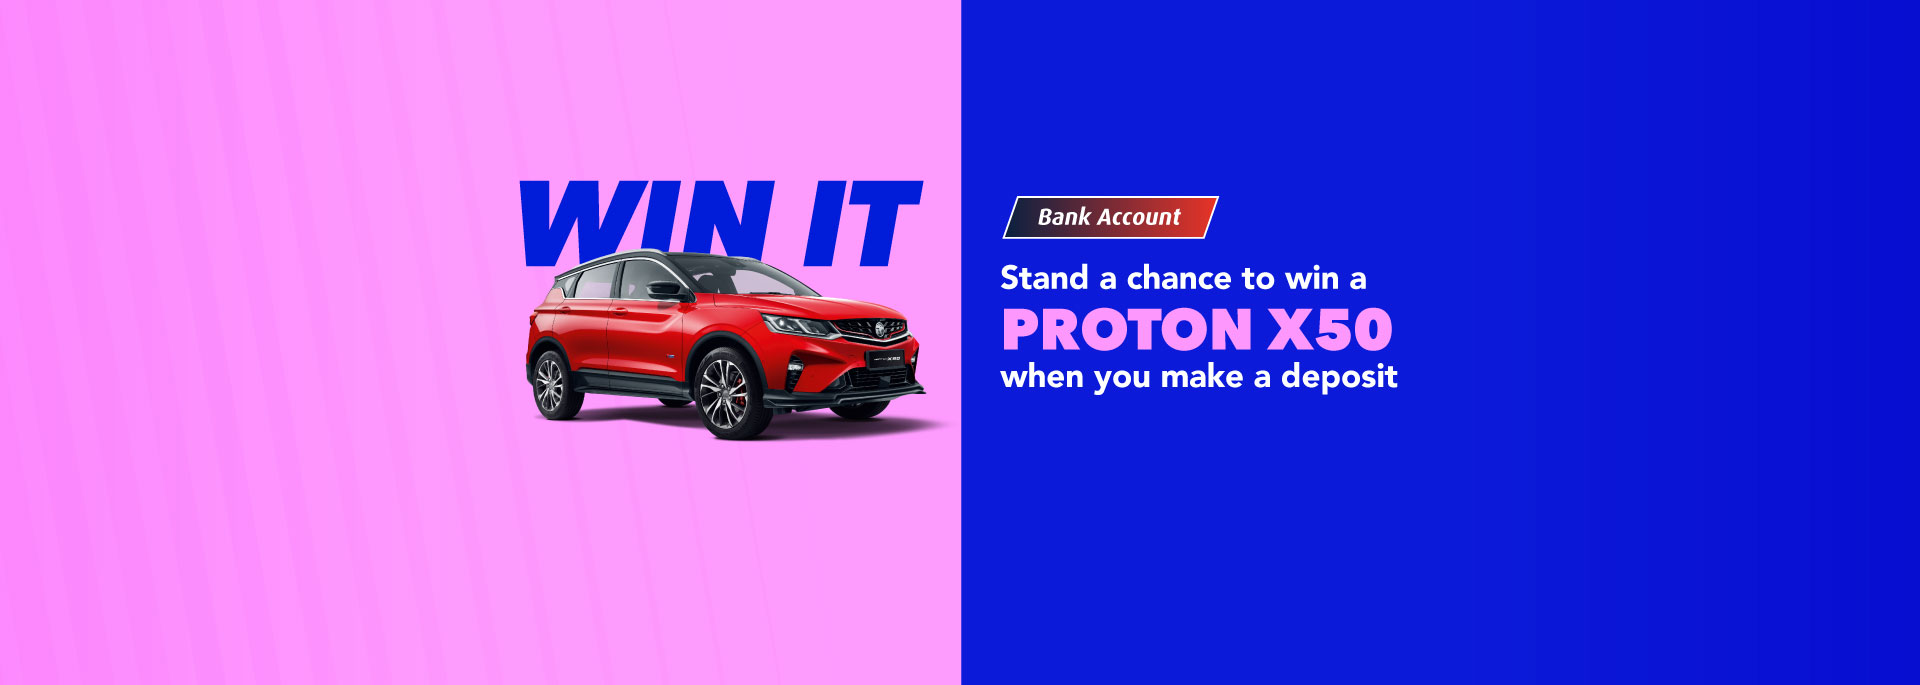 Stand a chance to win a Proton X50 when you make a deposit